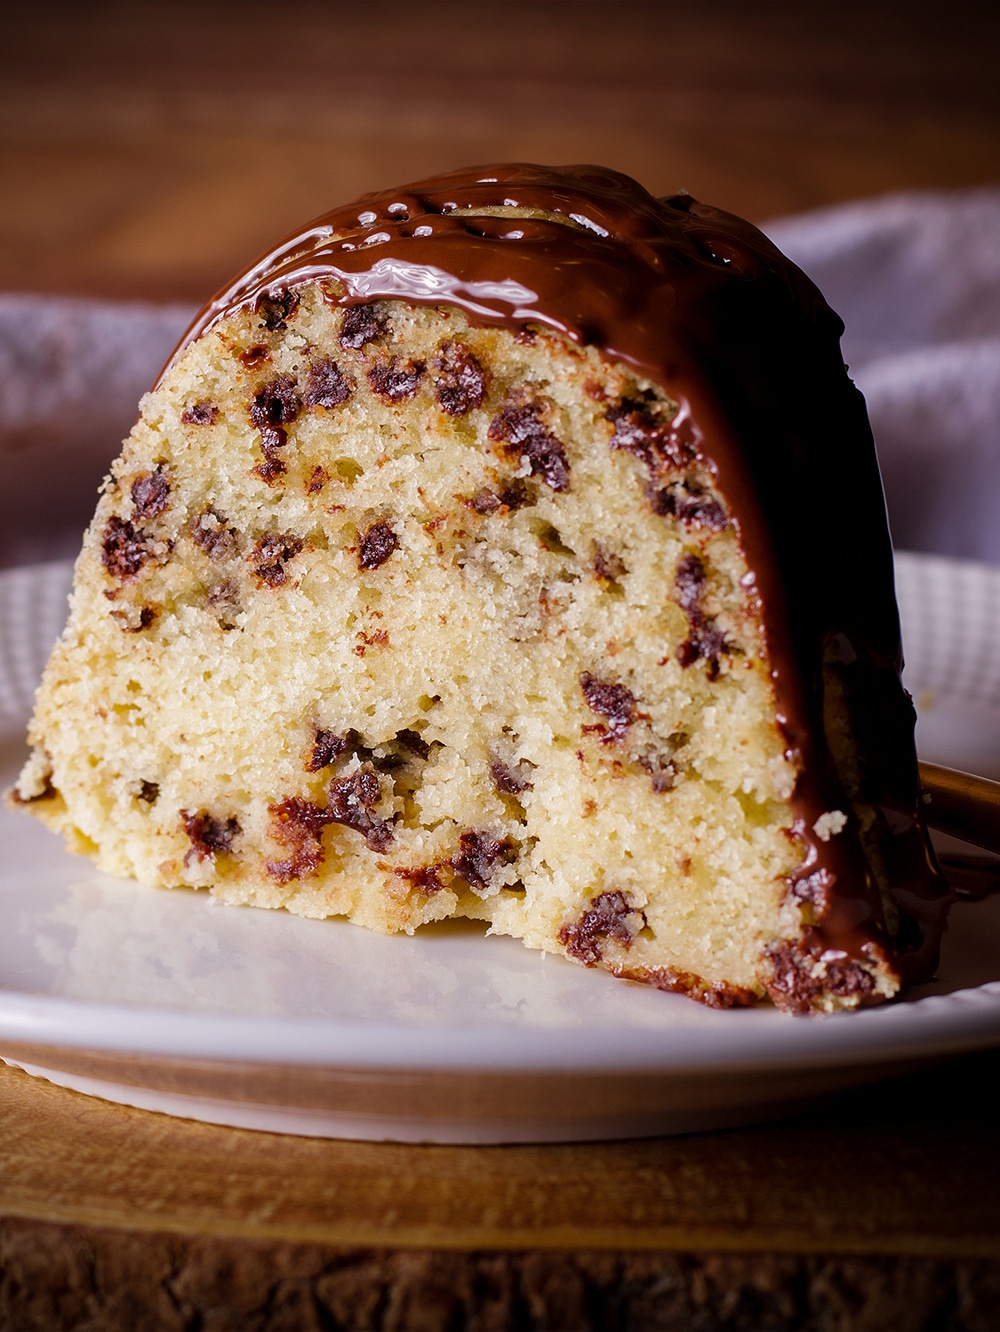 A slice of chocolate chip Bundt Cake on a plate, ready to eat.